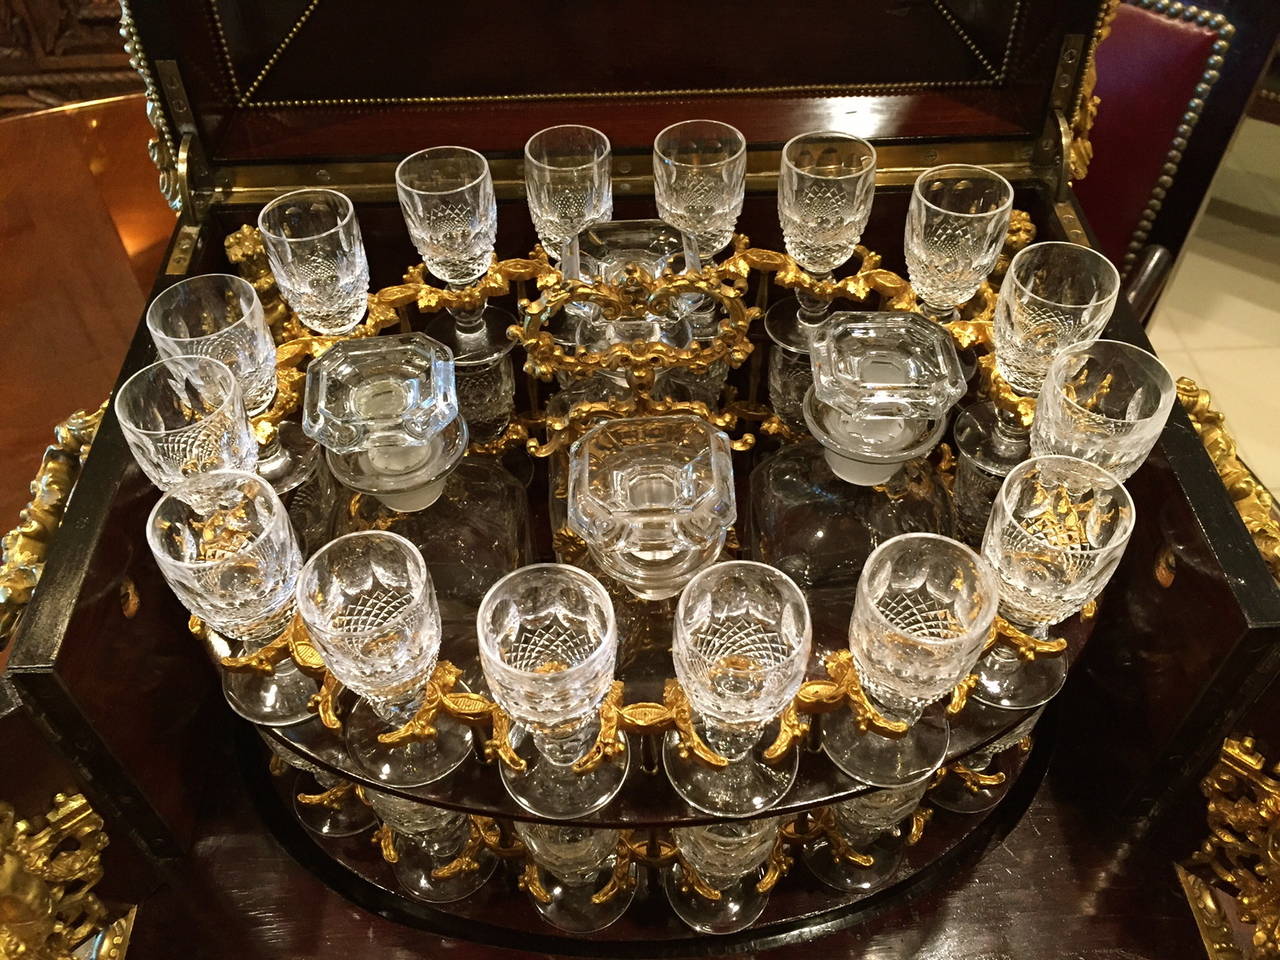 Extraordinary French Gilt Bronze-Mounted Tantalus Set Service for 32, circa 1870 In Excellent Condition For Sale In Redding, CA